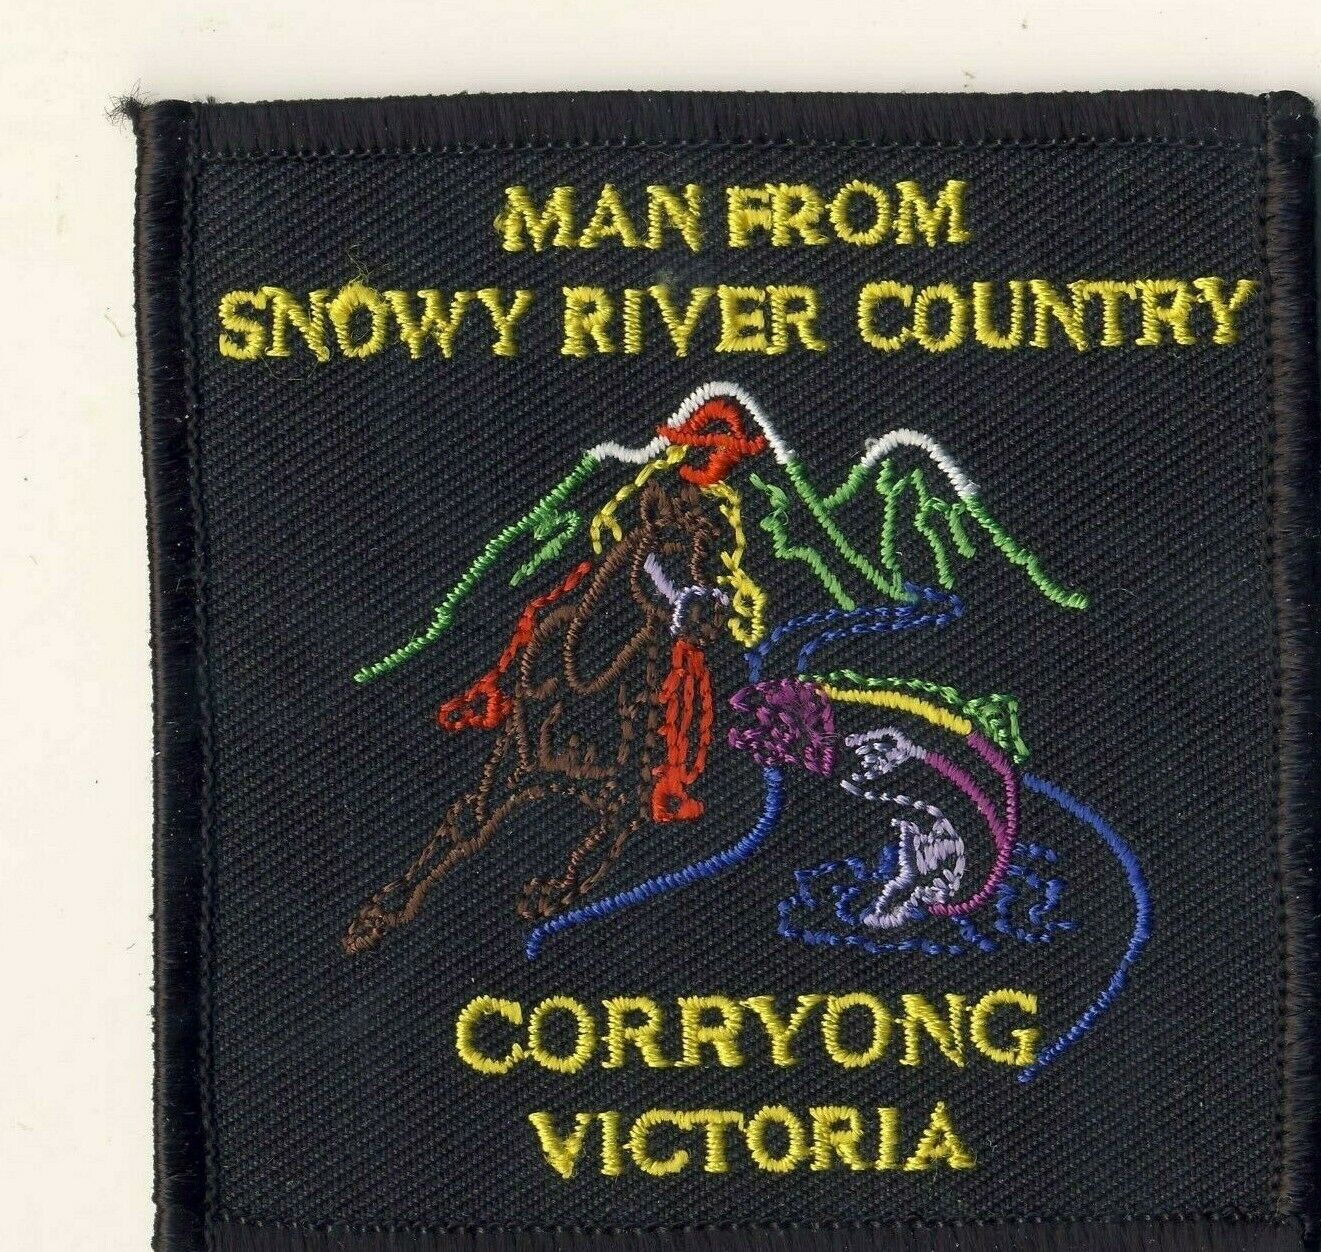 Man from the Snowy River Country Corryong Victoria AU Australi...